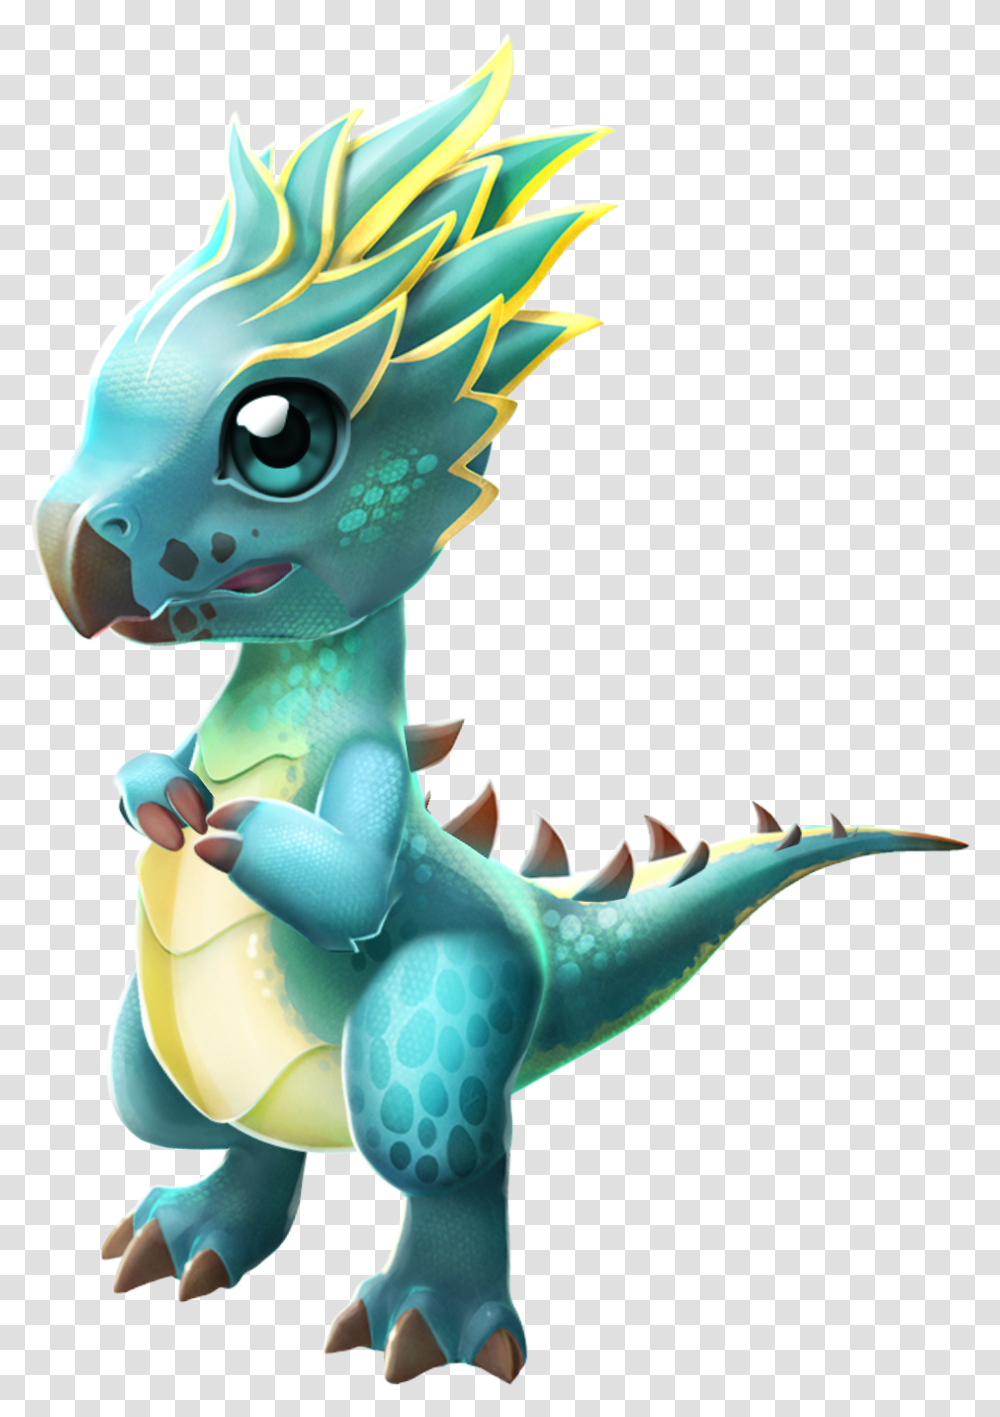 Agave Dragon Dragon Mania Legends Agave Dragon, Toy, Reptile, Animal, Alien Transparent Png